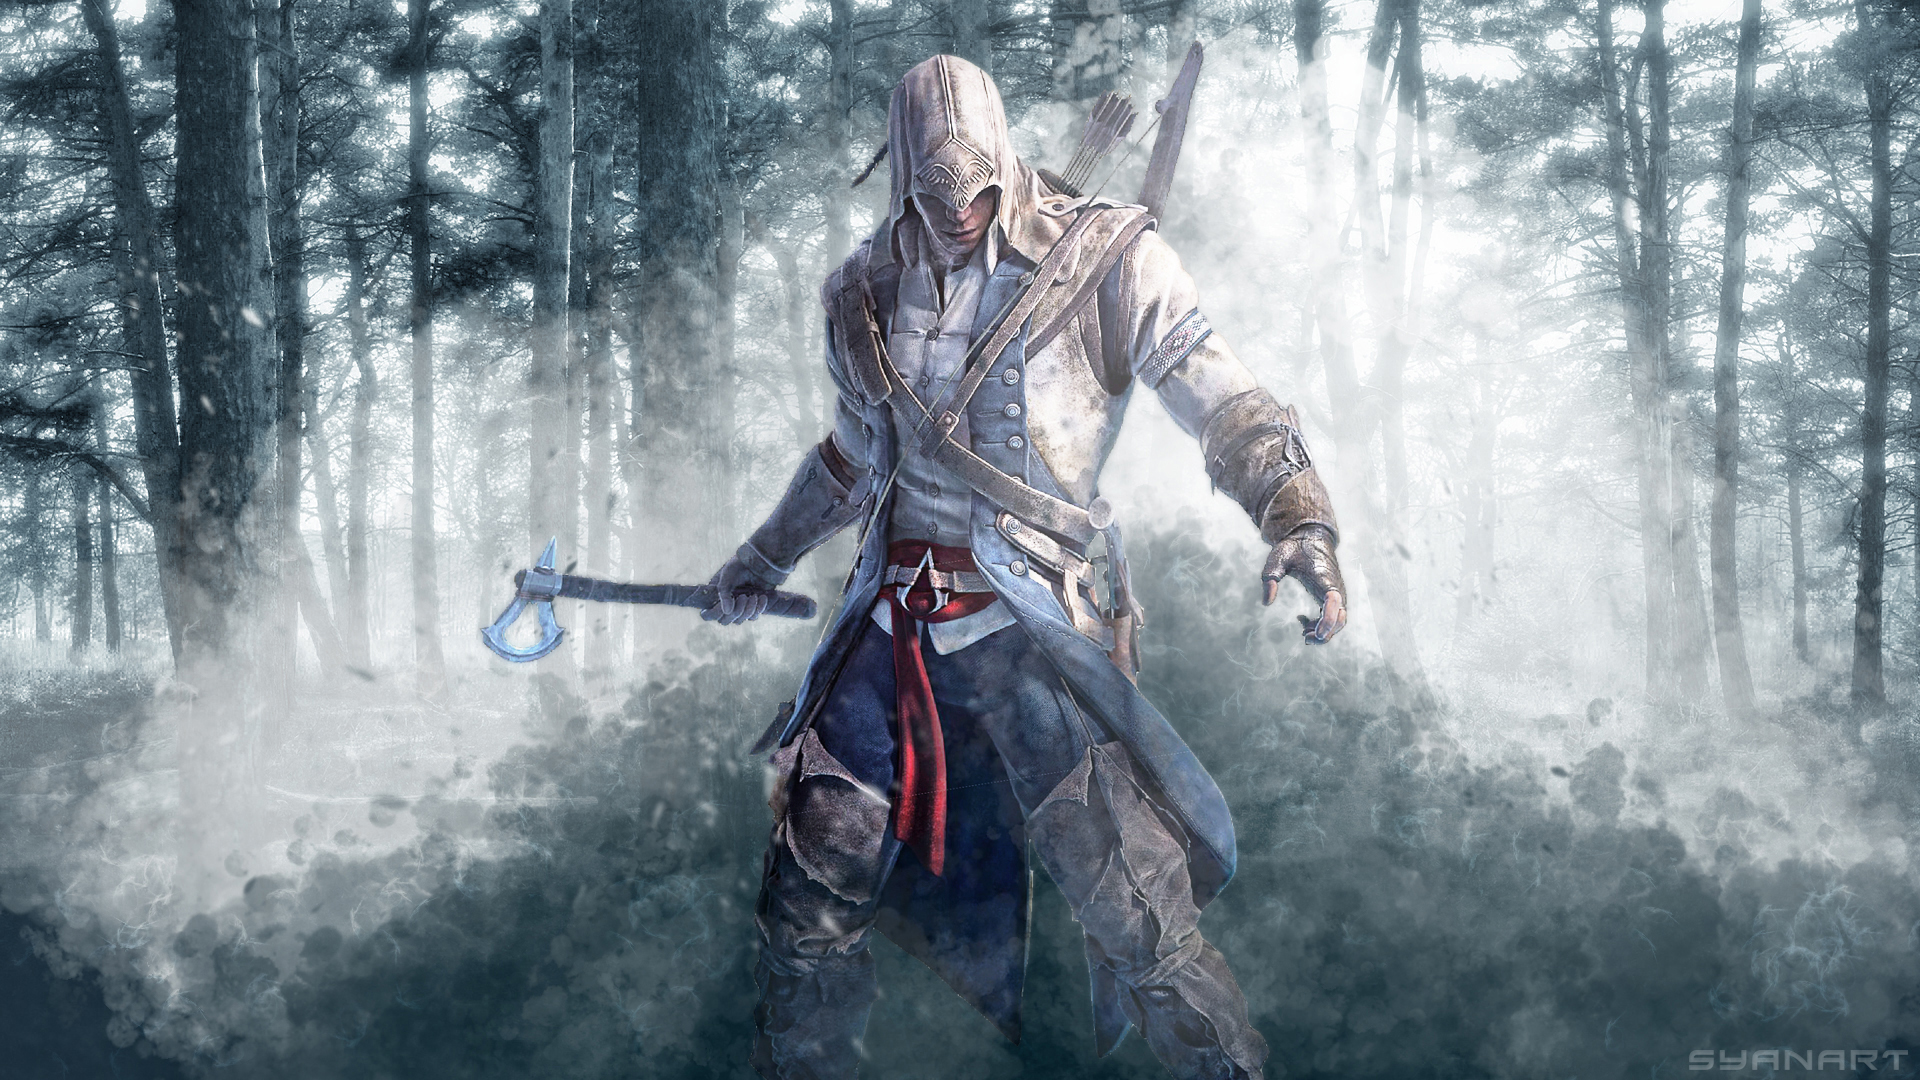 Connor 2K Assassin’s Creed III